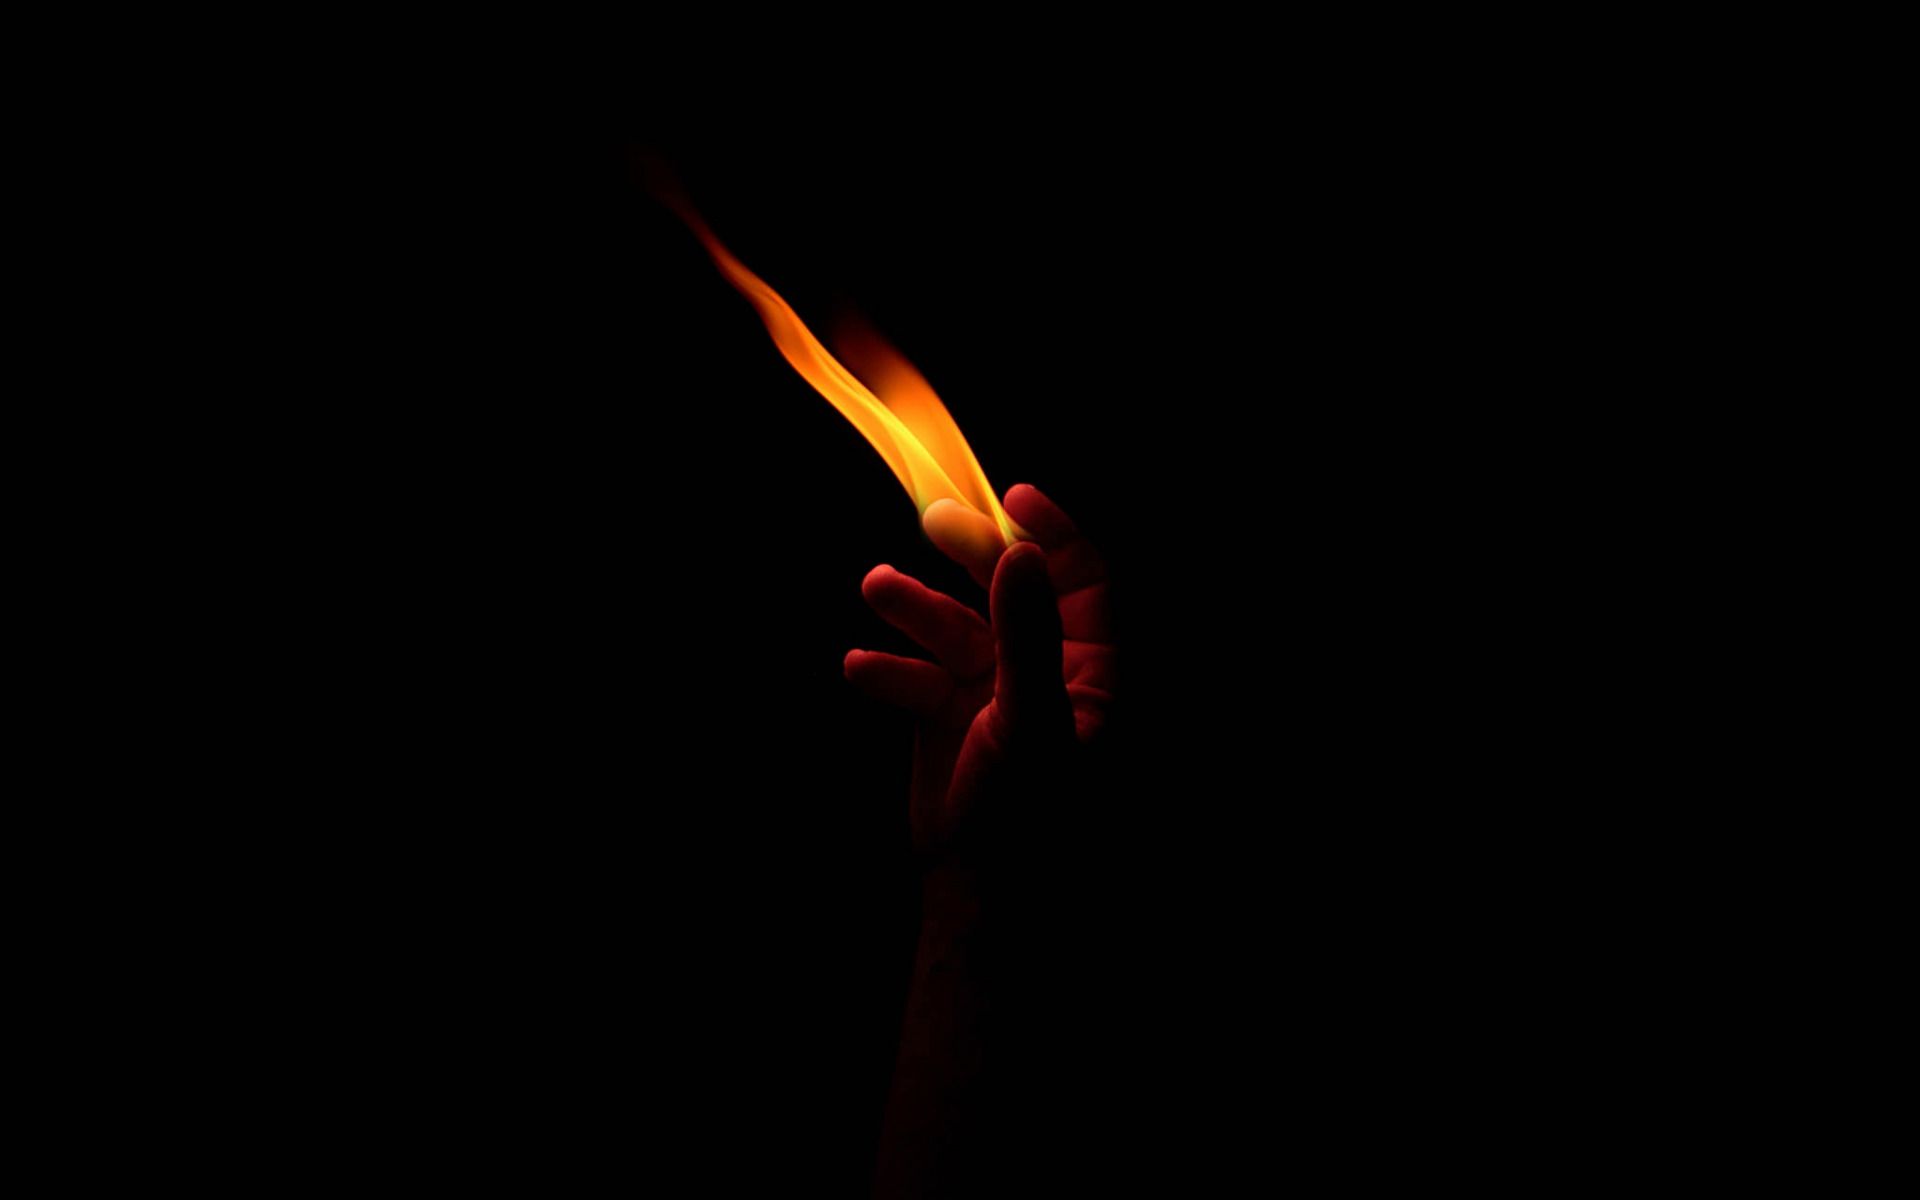 Download wallpaper fire in hand, flame, black background, hand, fire for desktop with resolution 1920x1200. High Quality HD picture wallpaper